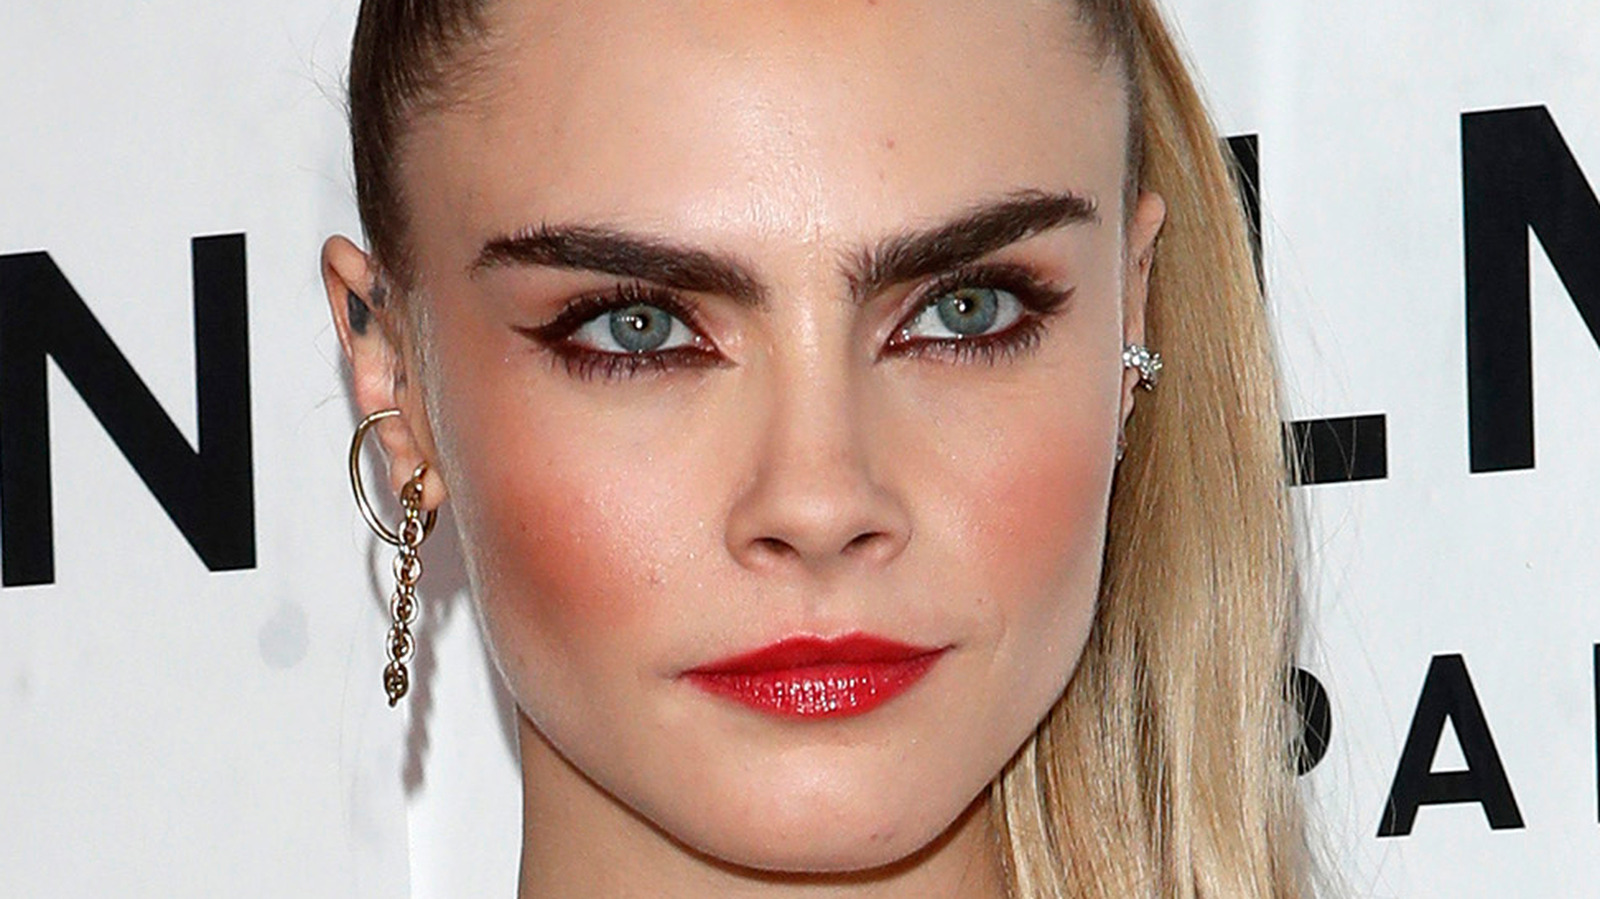 Here's What Cara Delevingne Looks Like Going Makeup-Free - The List